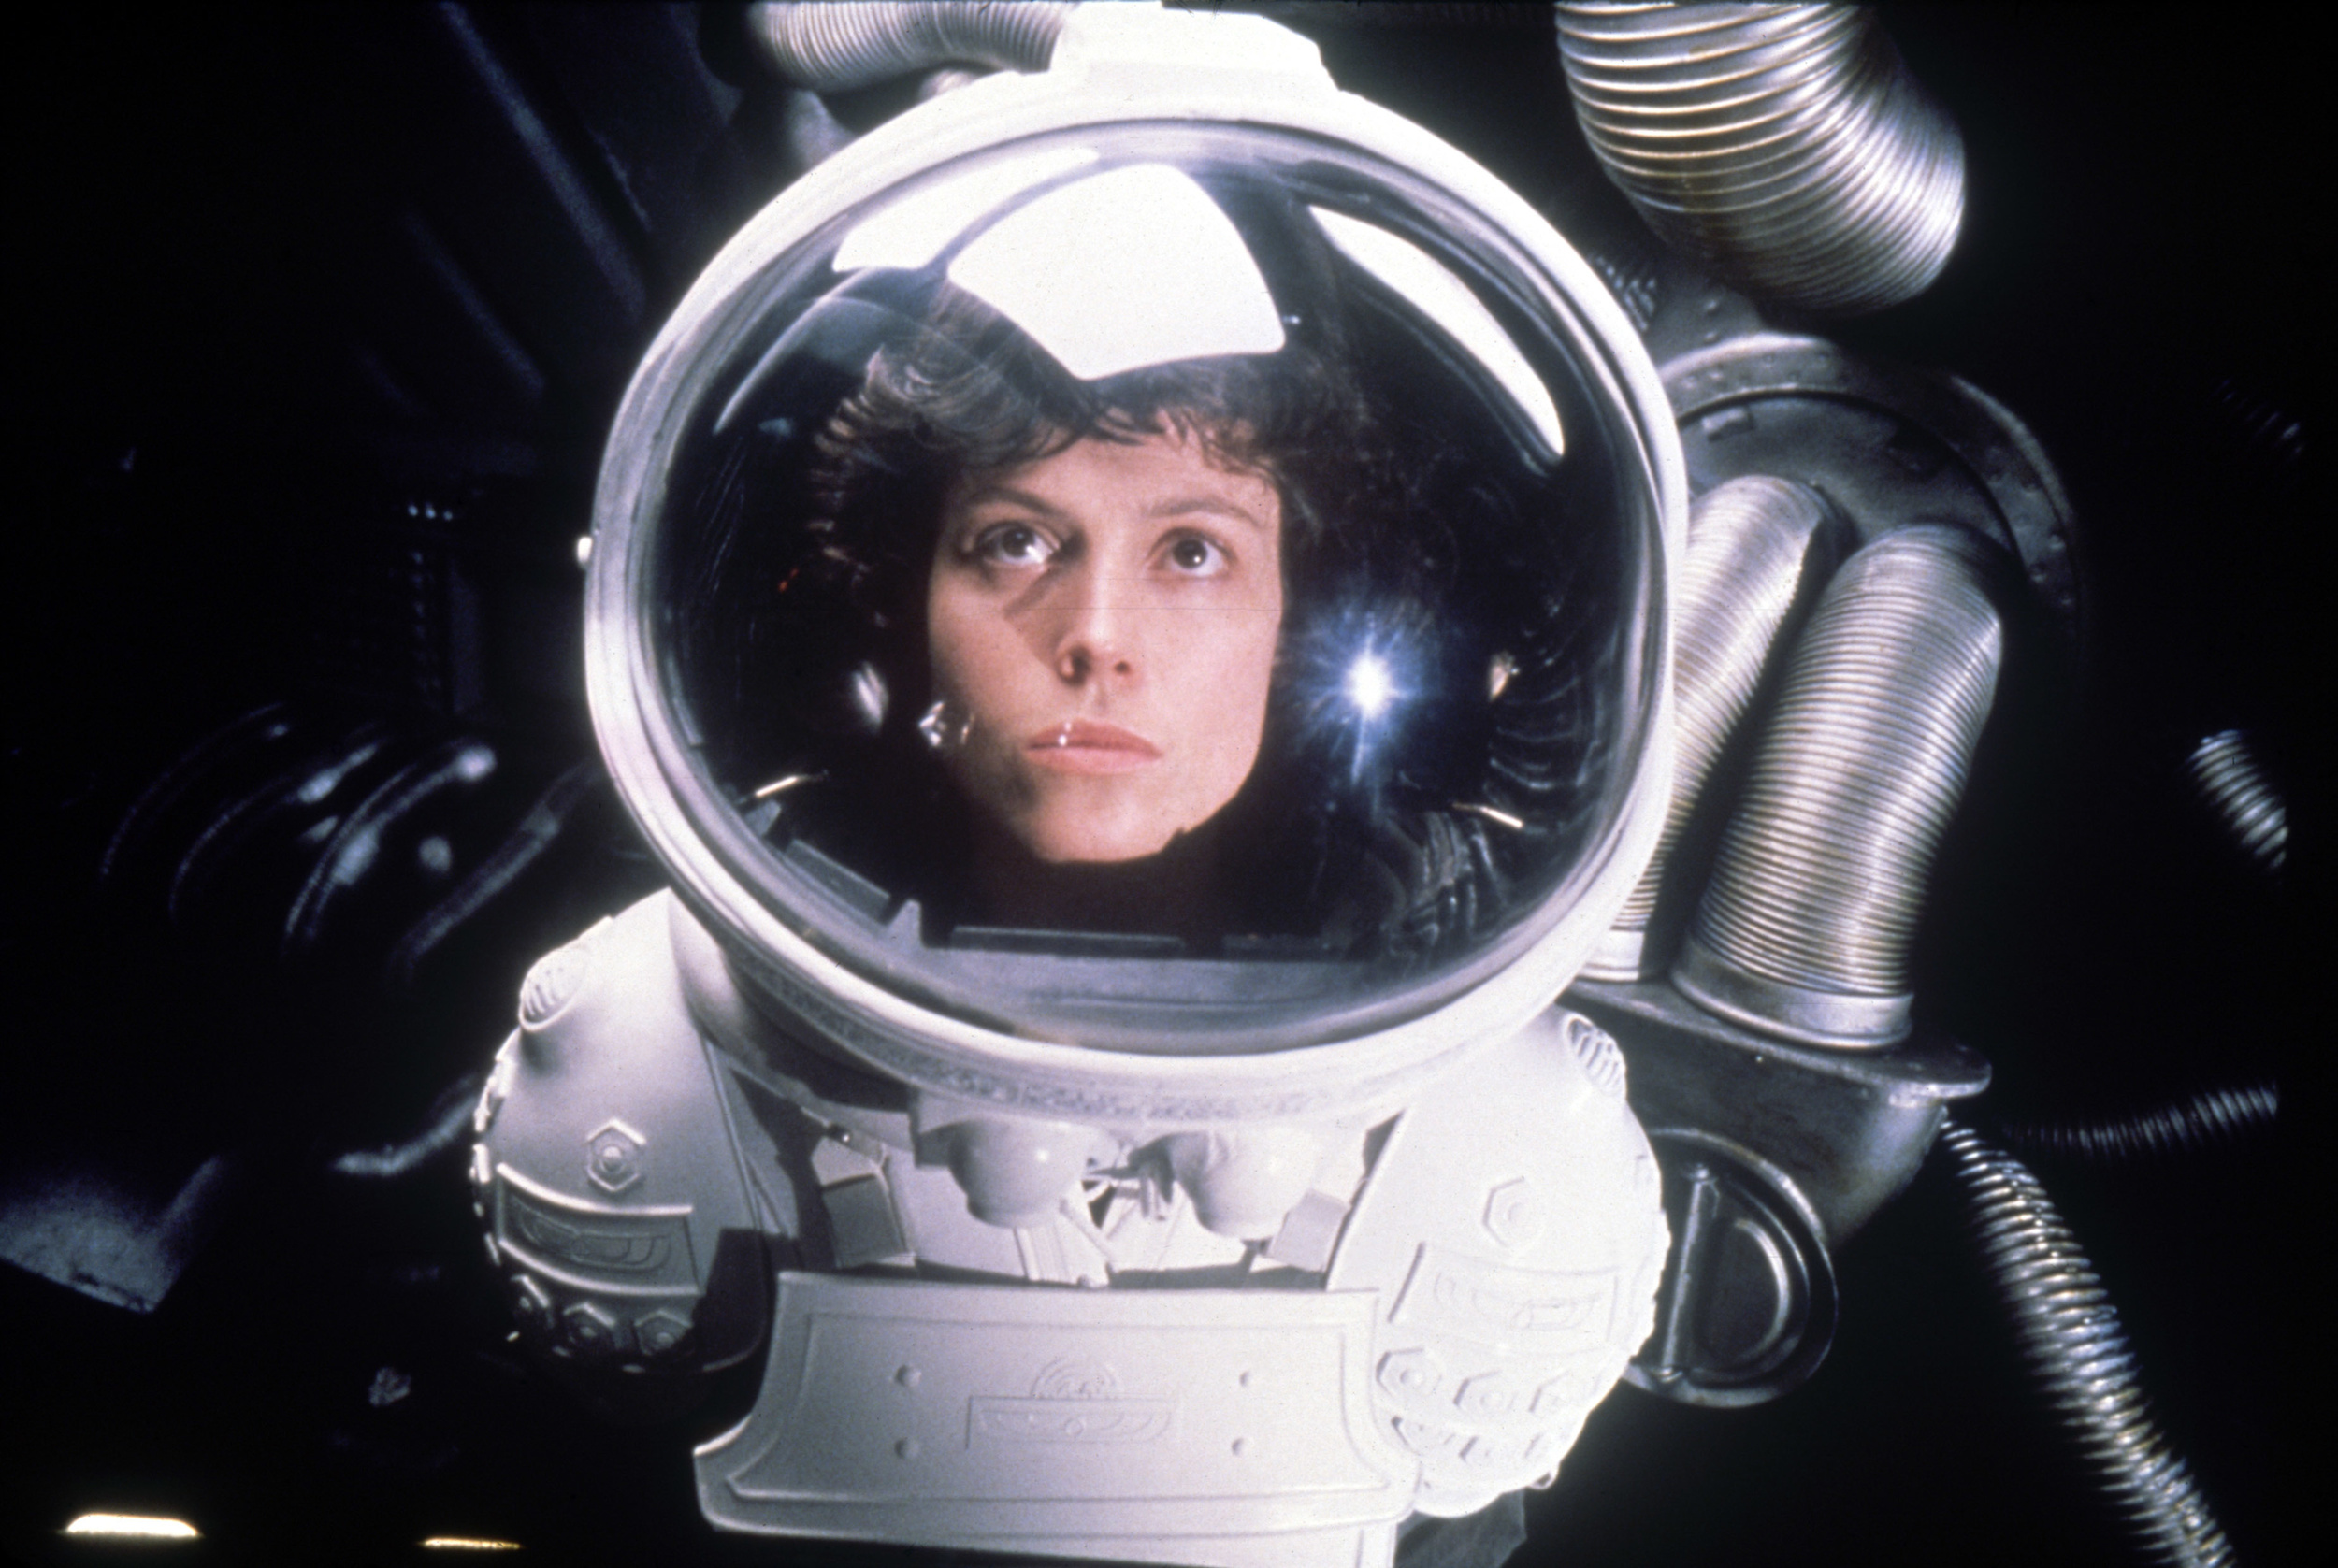 <p>Equal parts horror and science fiction, Ridley Scott’s <span><em>Alien</em> </span>packs a punch. Who could forget, for example, the creature of the title, which sees the crew of a spaceship as the perfect host to reproduce? Indeed, precisely this parasitic life cycle earns <span><em>Alien</em> </span>the distinction of being remarkably scientifically accurate despite its horror trappings. Biologists have particularly praised the extent to which it depicts how a parasite can move through different stages of life quite quickly, and it is in part this embodied verisimilitude that allows the film to still feel so disconcerting and viscerally upsetting. </p><p>You may also like: <a href='https://www.yardbarker.com/entertainment/articles/the_25_greatest_prince_songs_of_all_time_110223/s1__23741665'>The 25 greatest Prince songs of all time</a></p>